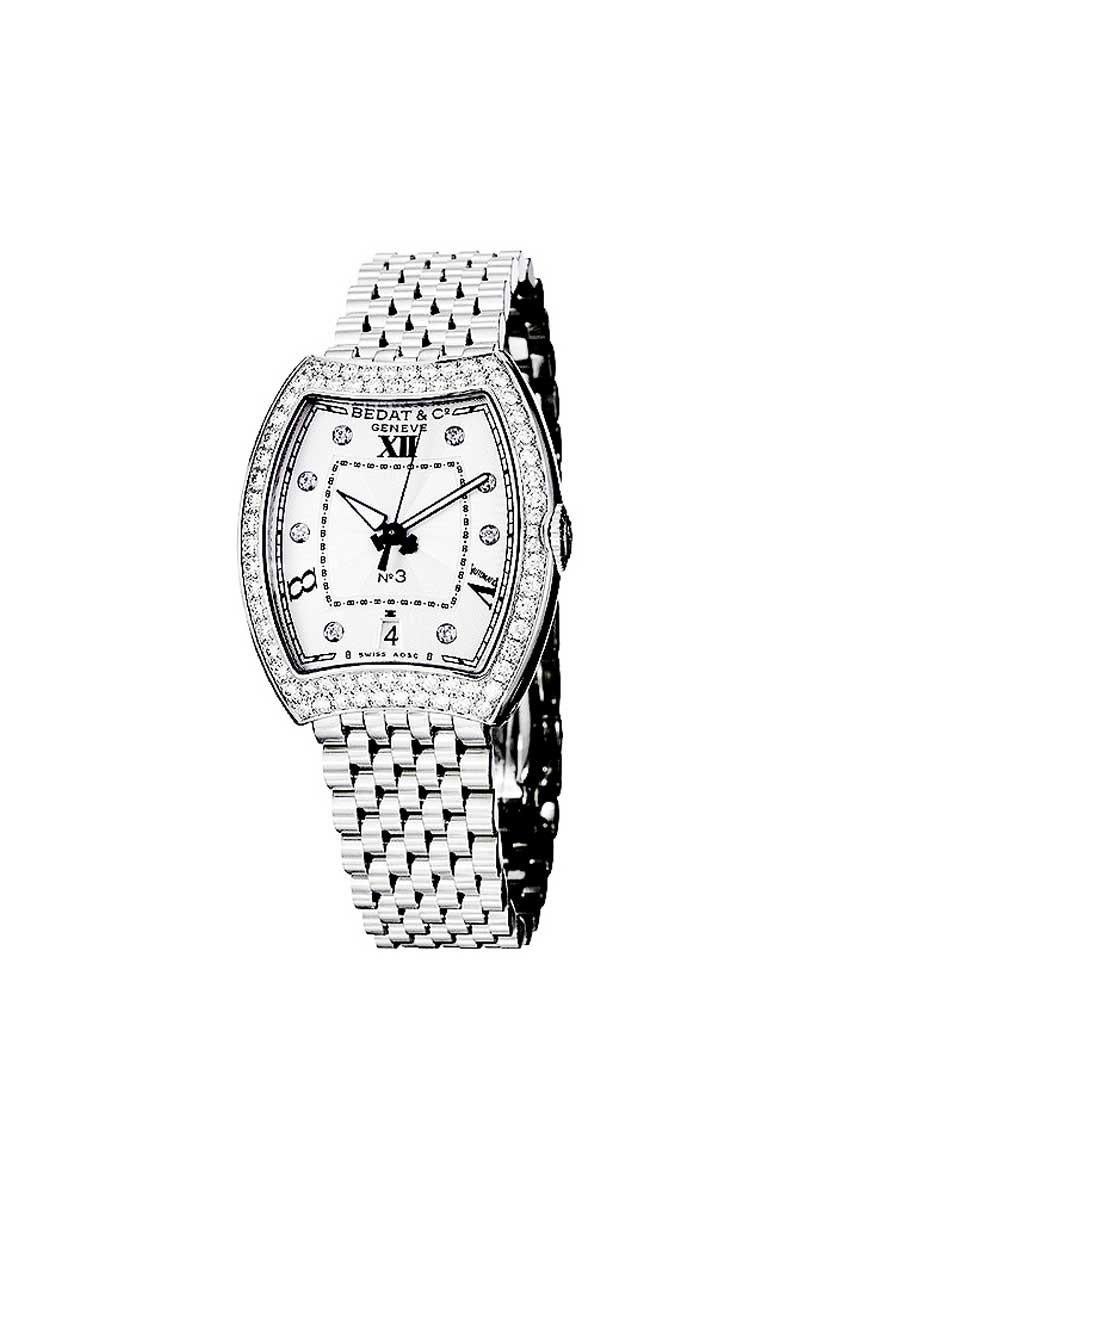 Stainless steel case with a stainless steel bracelet. Fixed bezel set with diamonds. Silver dial with luminous hands and diamond hour markers. Minute markers around the outer rim. Dial Type: Analog. Date display at the 6 o'clock position. Automatic